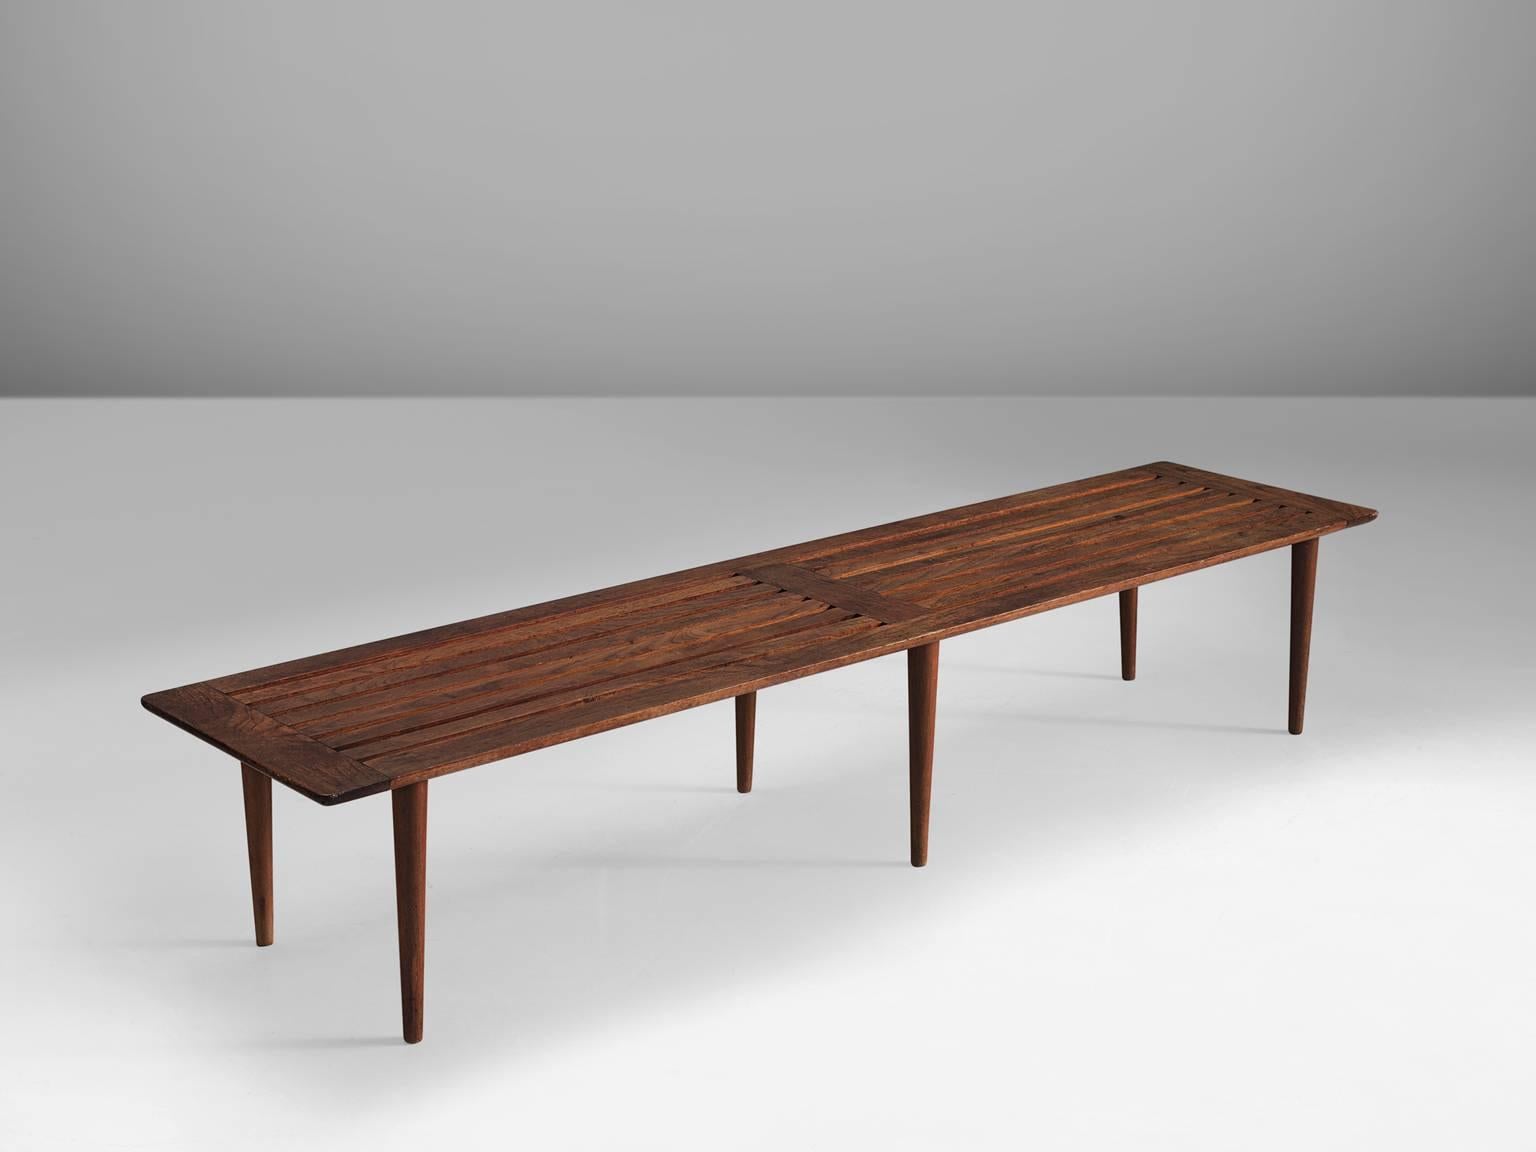 Bench, teak and oak, Denmark, 1950s.

This long wooden bench features six circular tapered legs. The bench has slats that are integrated in the seat. The bench is modest and understated in its design. Thanks to the simplicity of the design and the